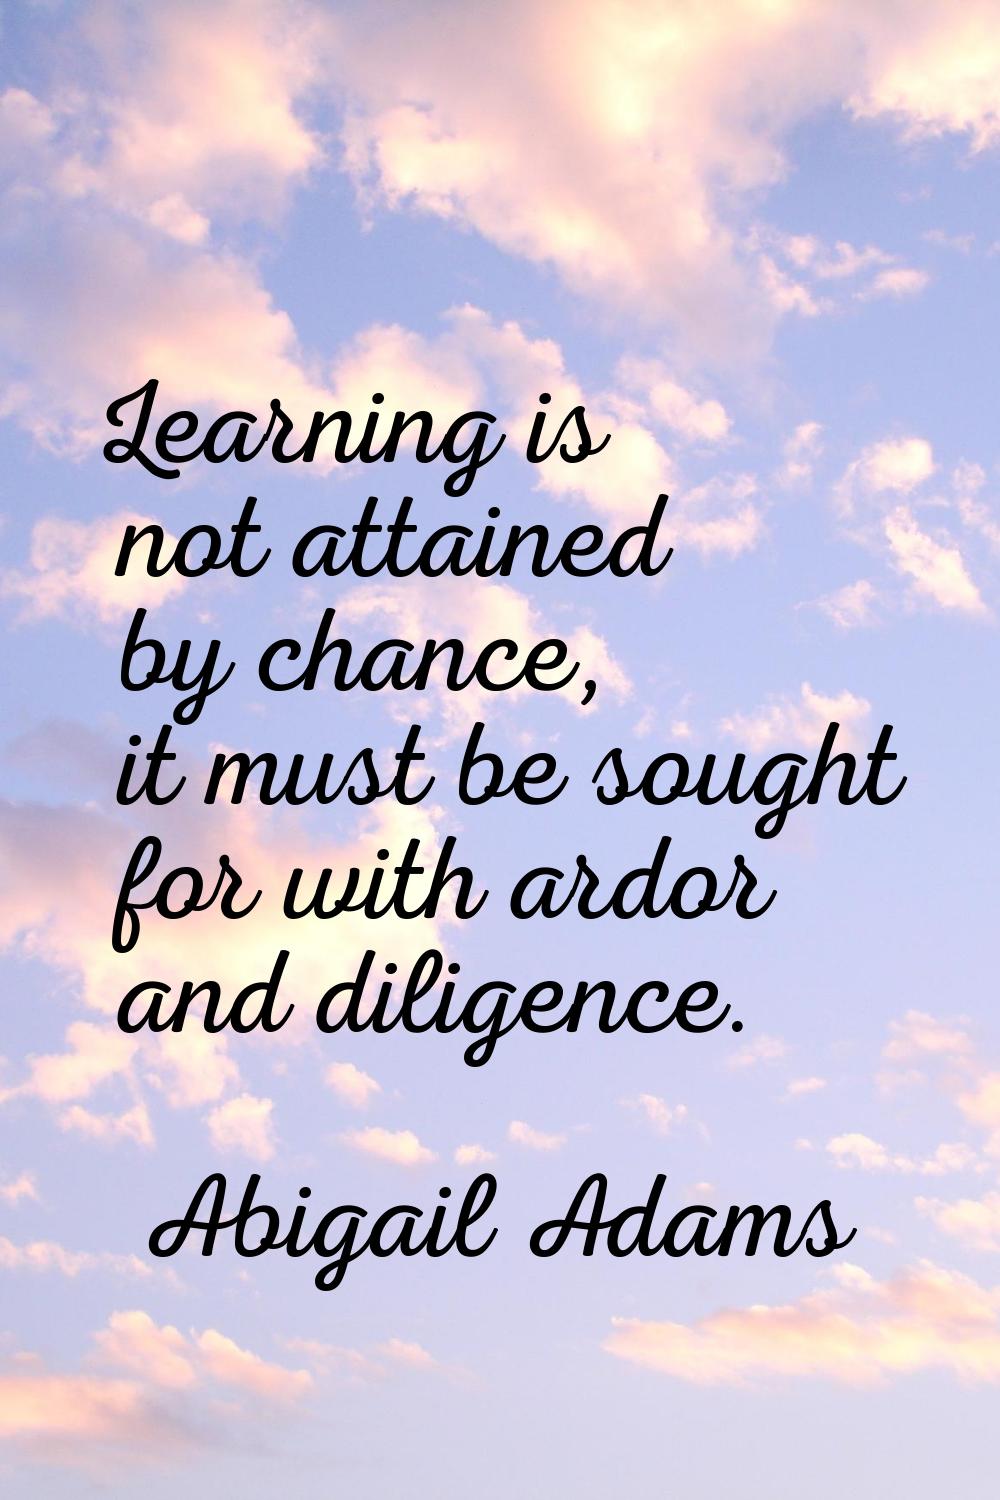 Learning is not attained by chance, it must be sought for with ardor and diligence.